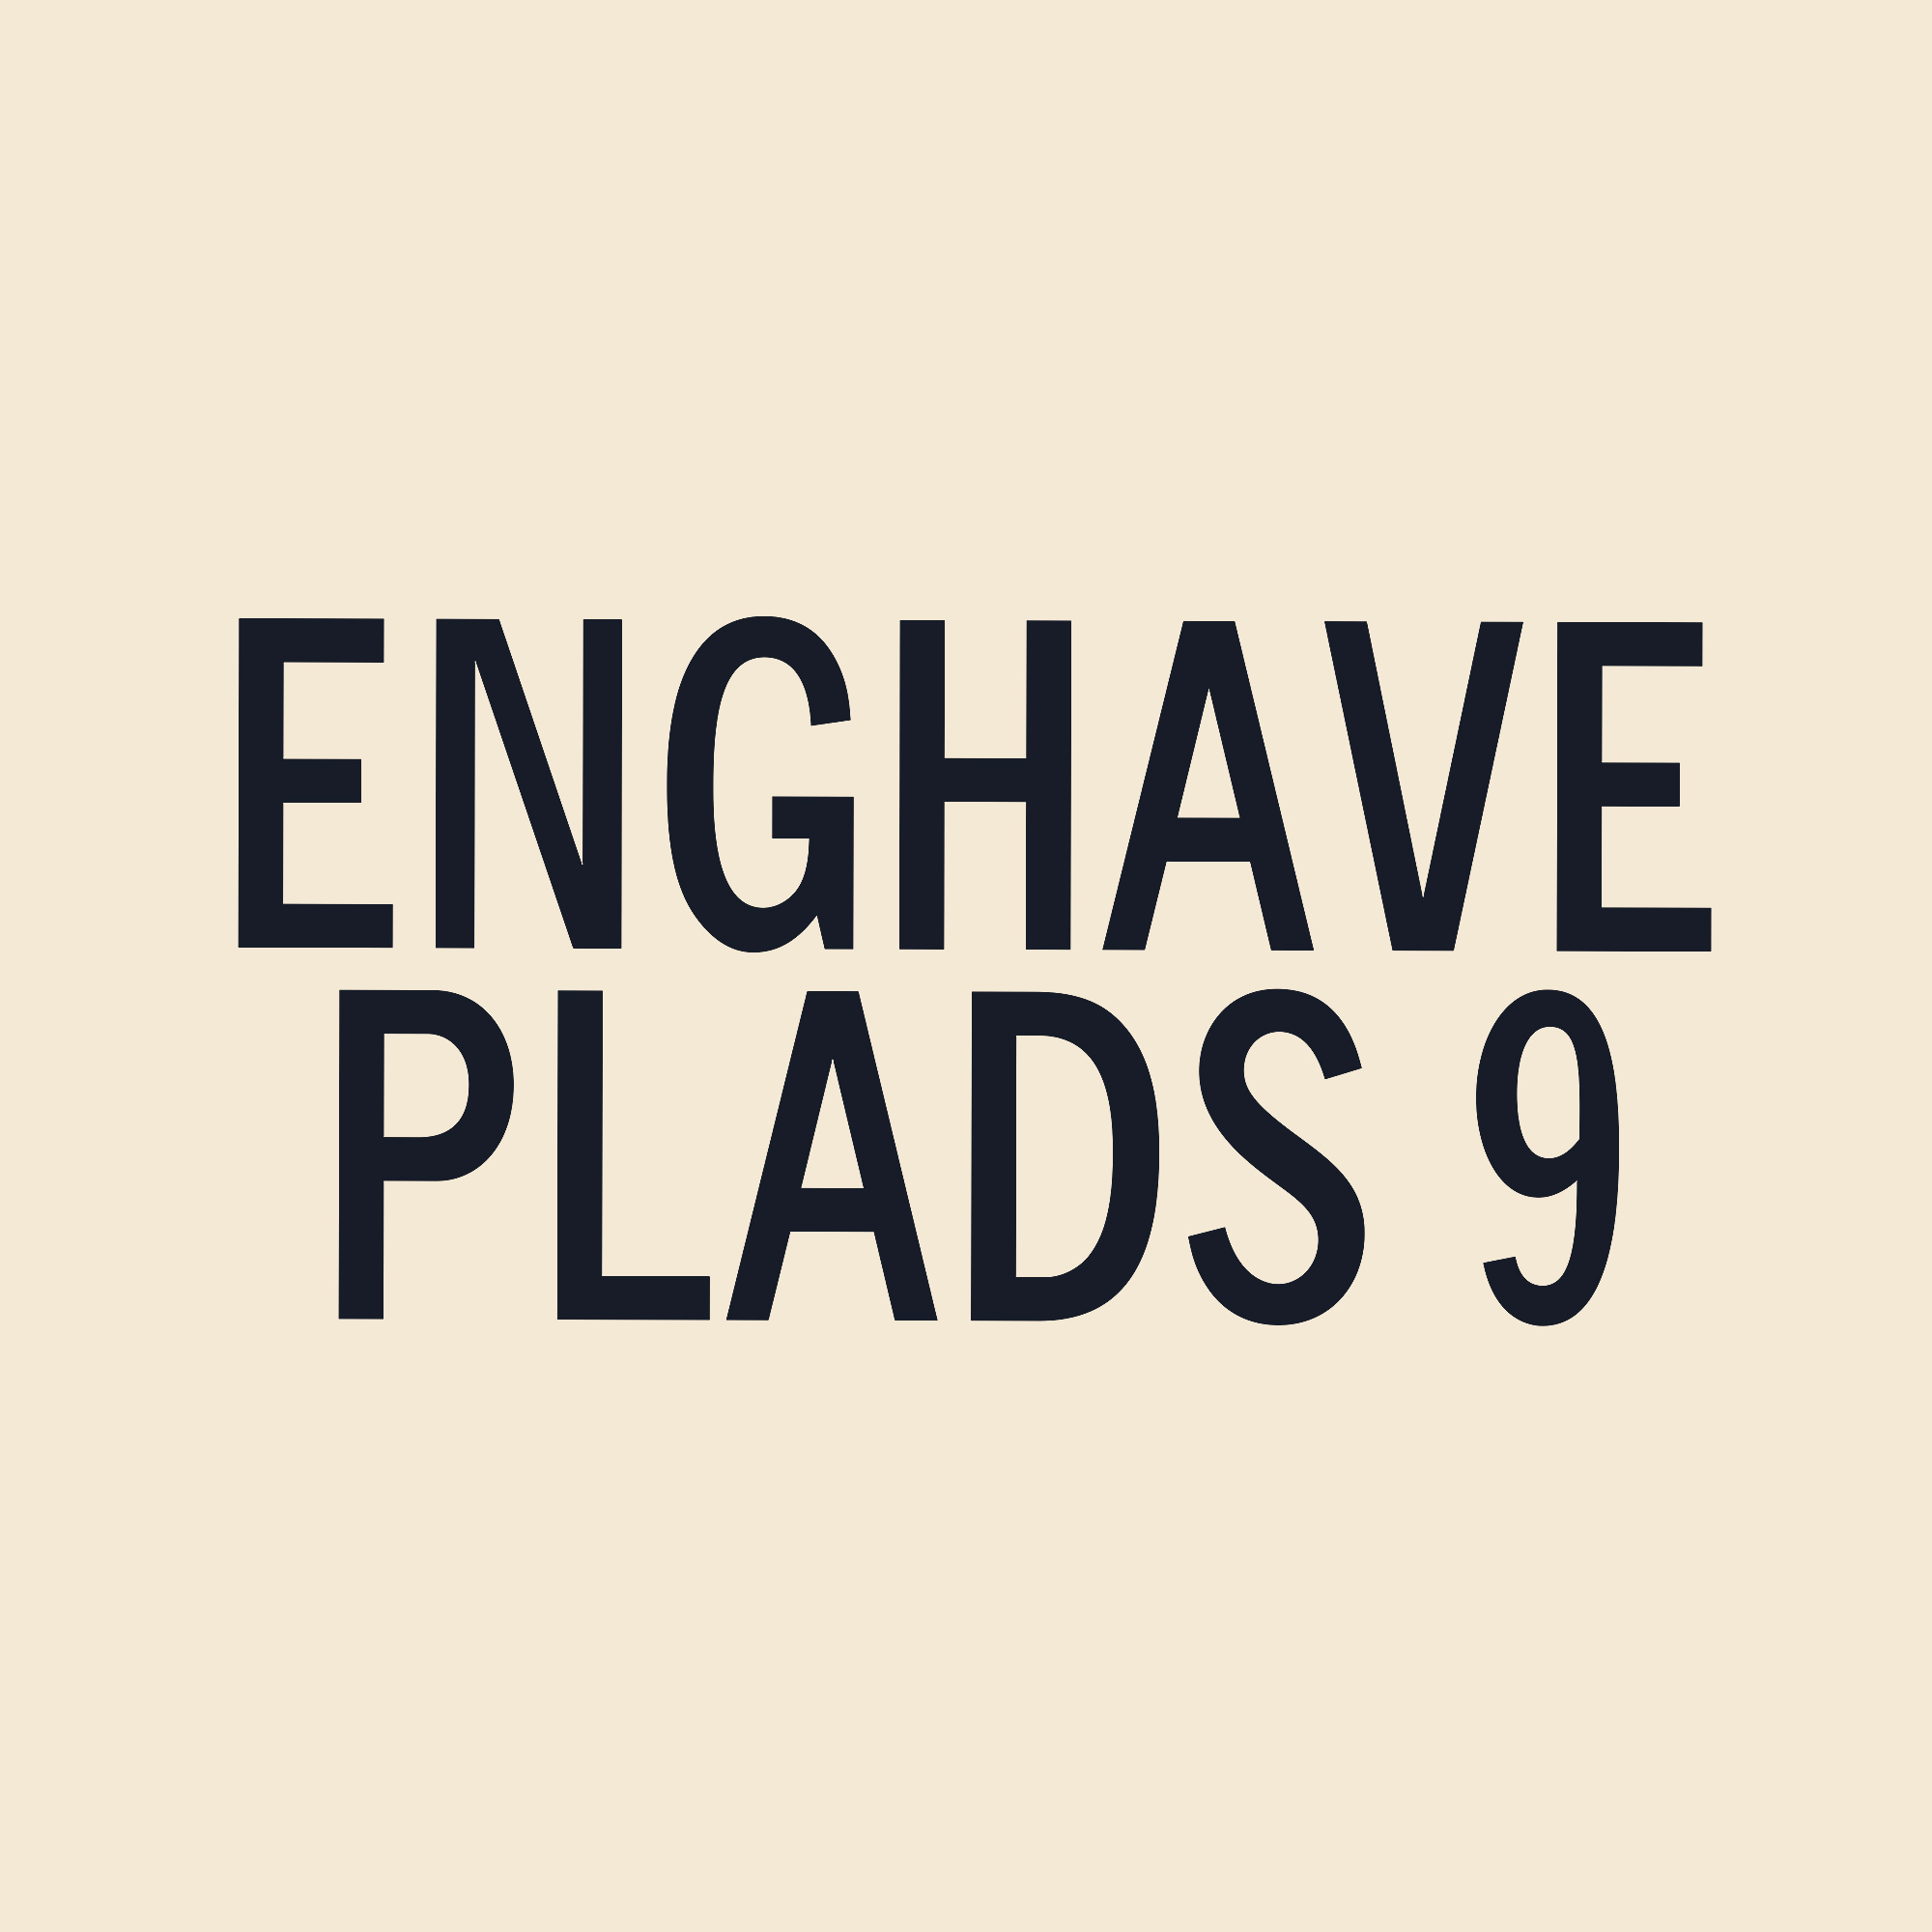 Enghave Plads 9